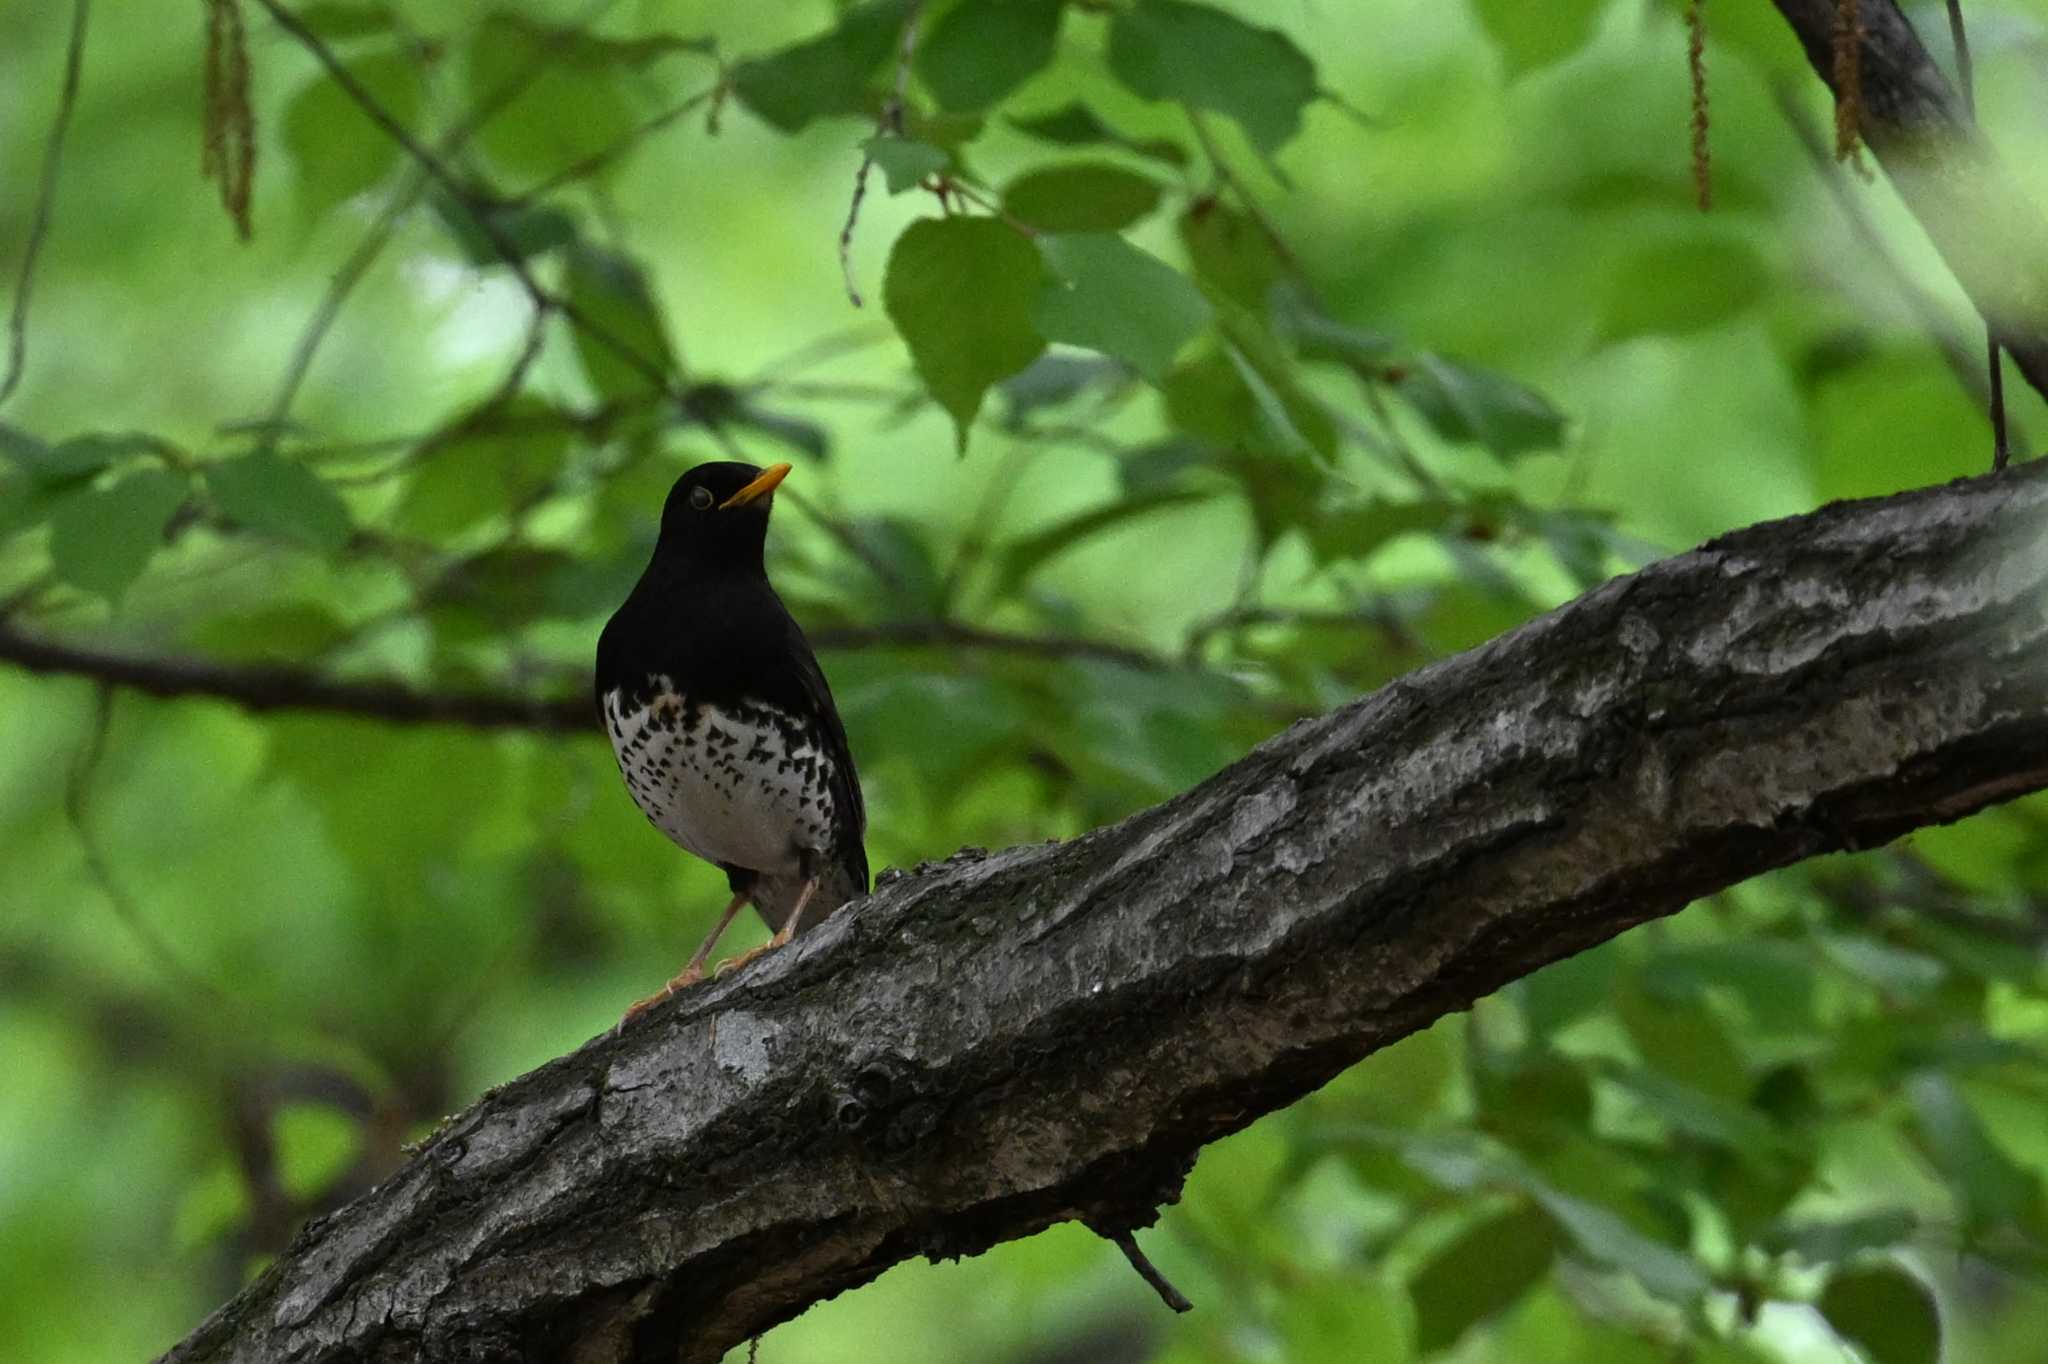 Photo of Japanese Thrush at 山梨県森林公園金川の森(山梨県笛吹市) by servalrose